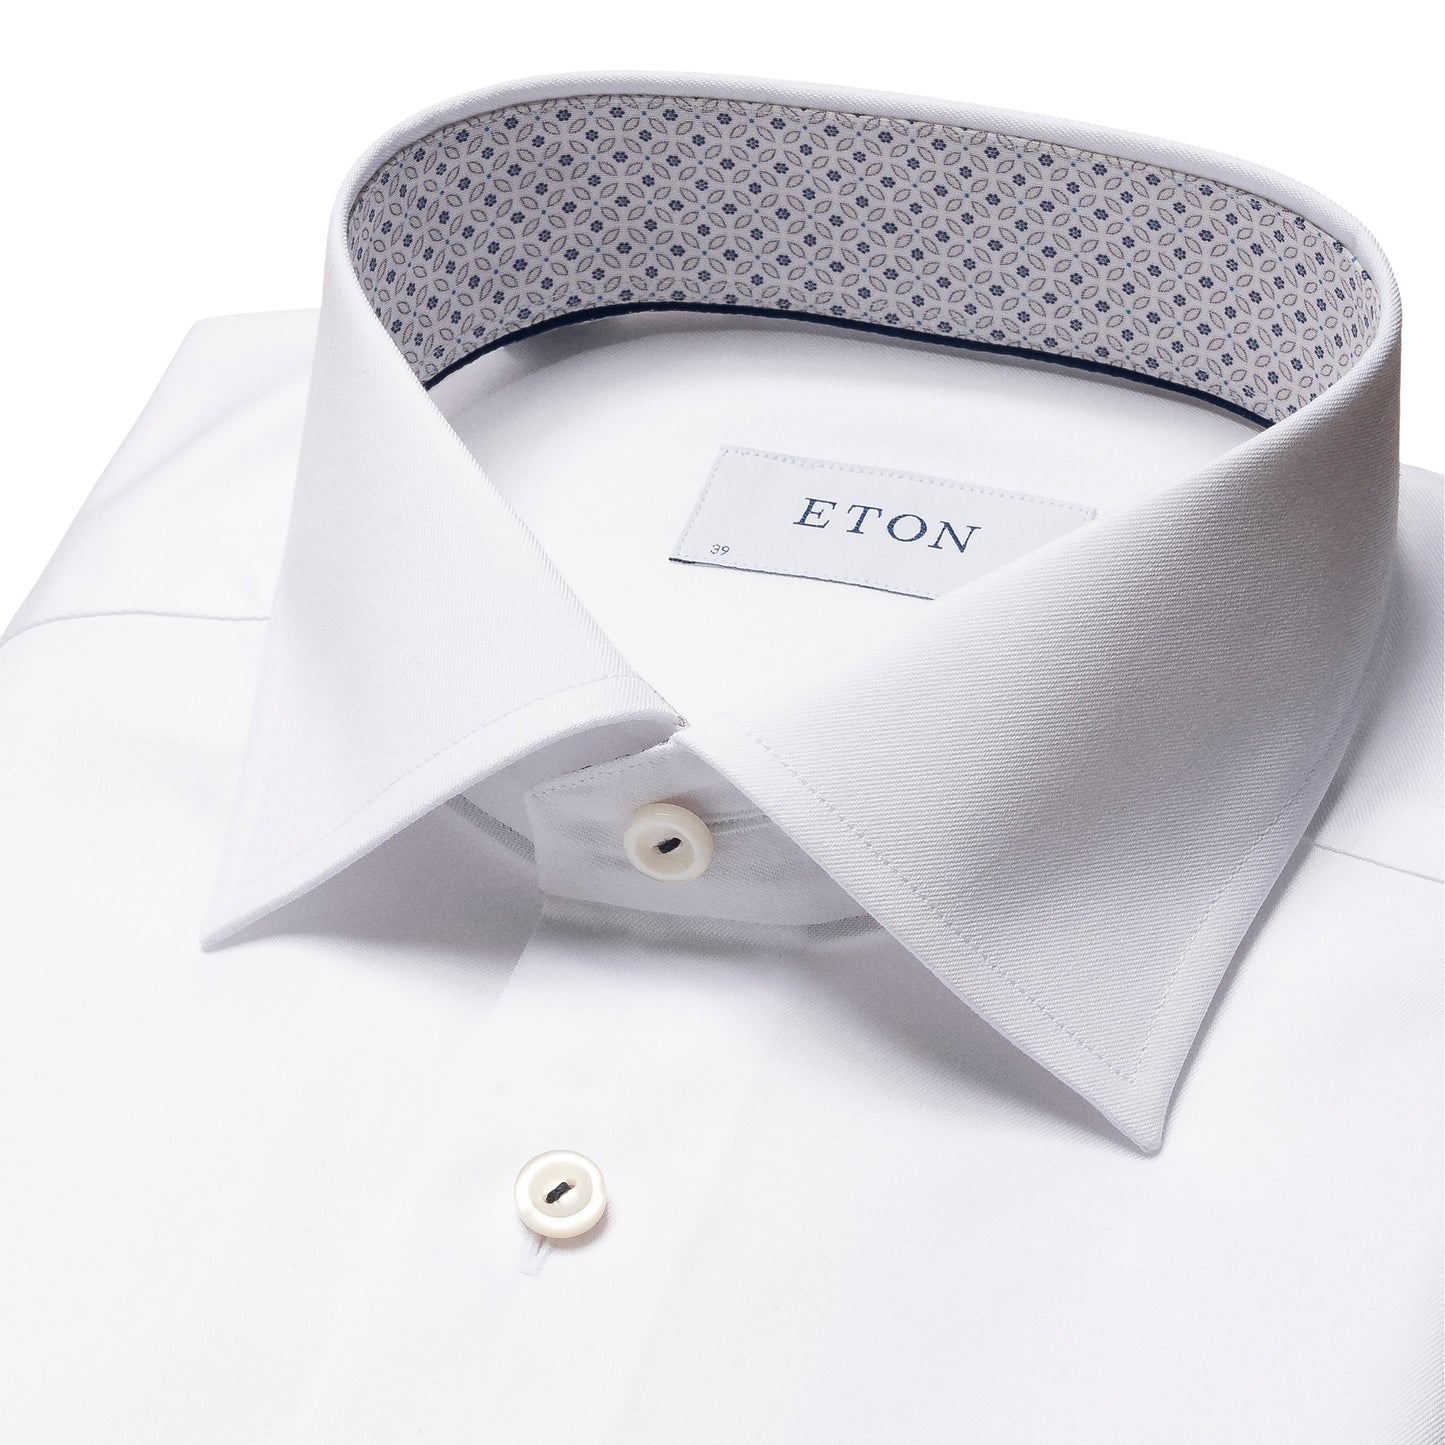 ETON Signature Twill Contemporary Fit Shirt in White with Floral Contrast Details 10001046000